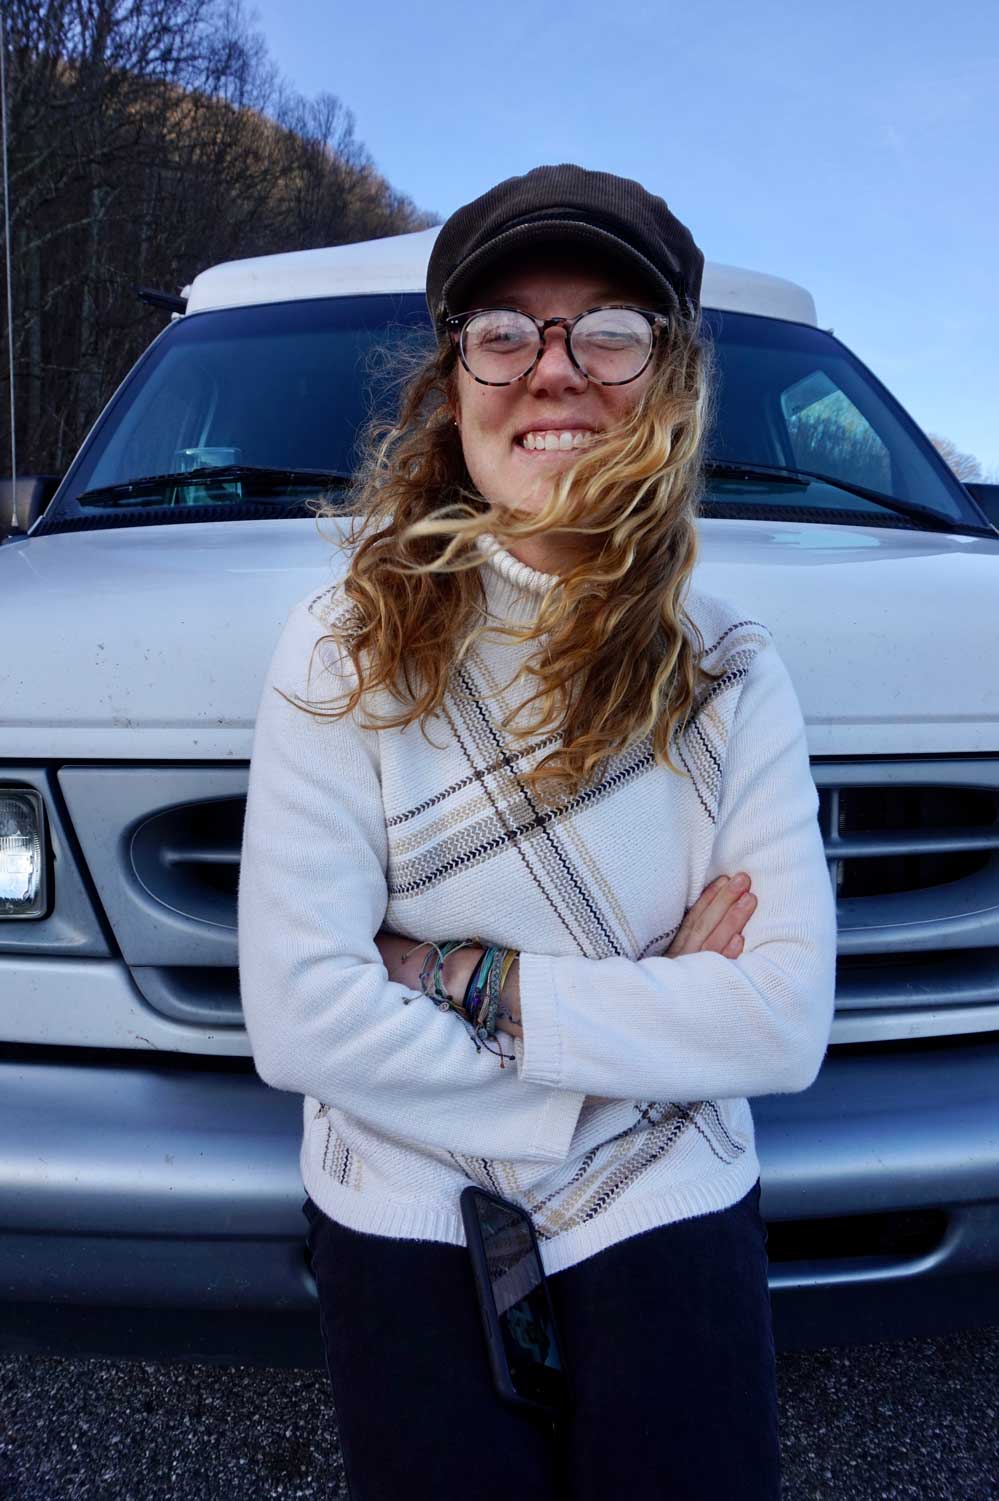 Image of Courtney Stephenson in front of her camper van in the mountains